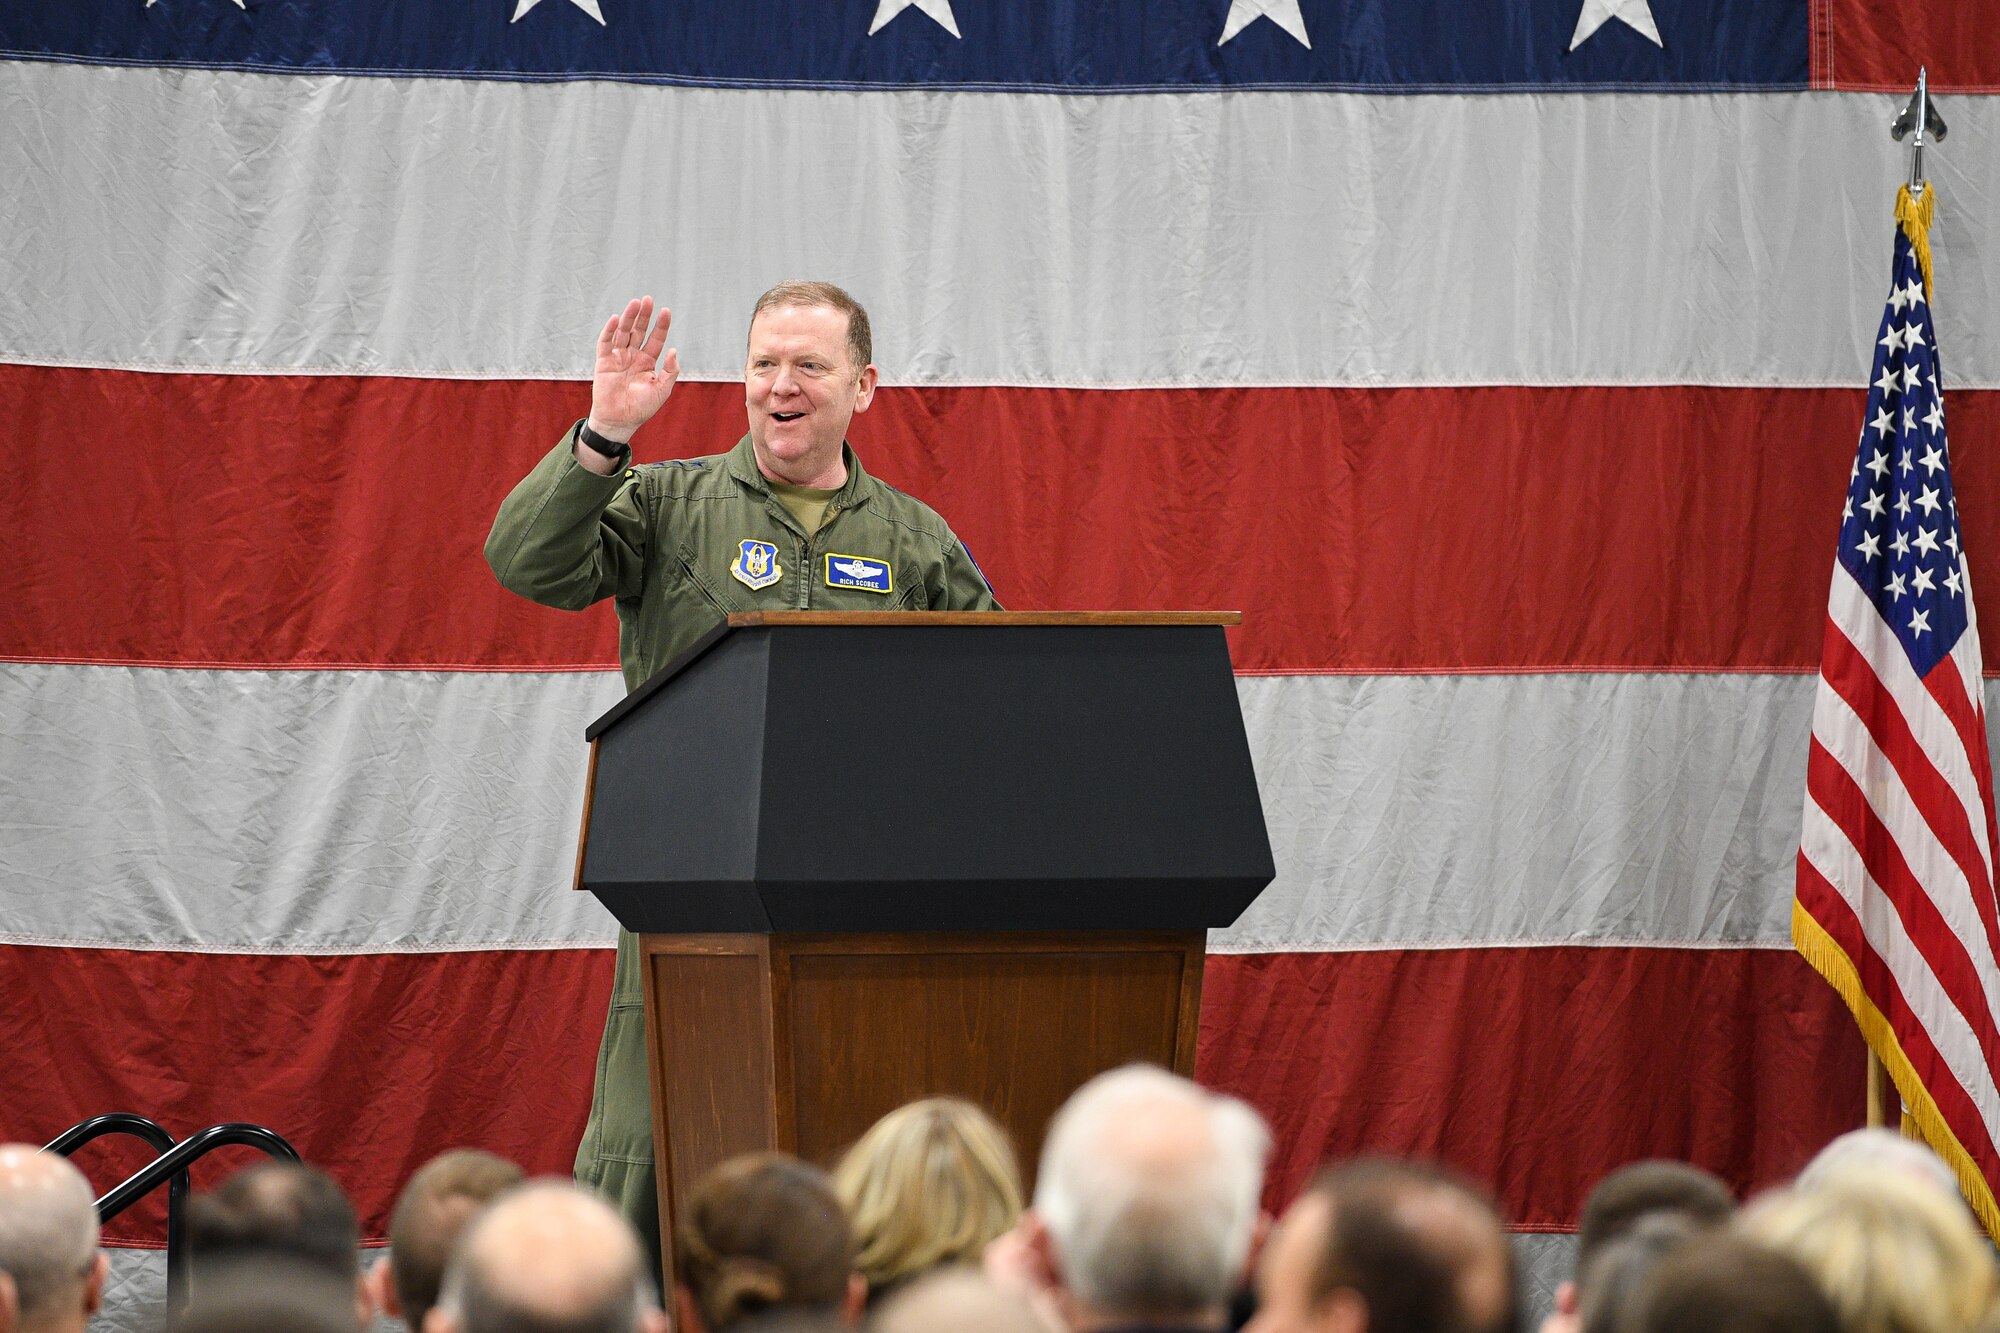 Lt. Gen. Richard W. Scobee, Air Force Reserve Command commander and chief of the Air Force Reserve, speaks at a Full Warfighting Capability Ceremony at Hill Air Force Base, Utah